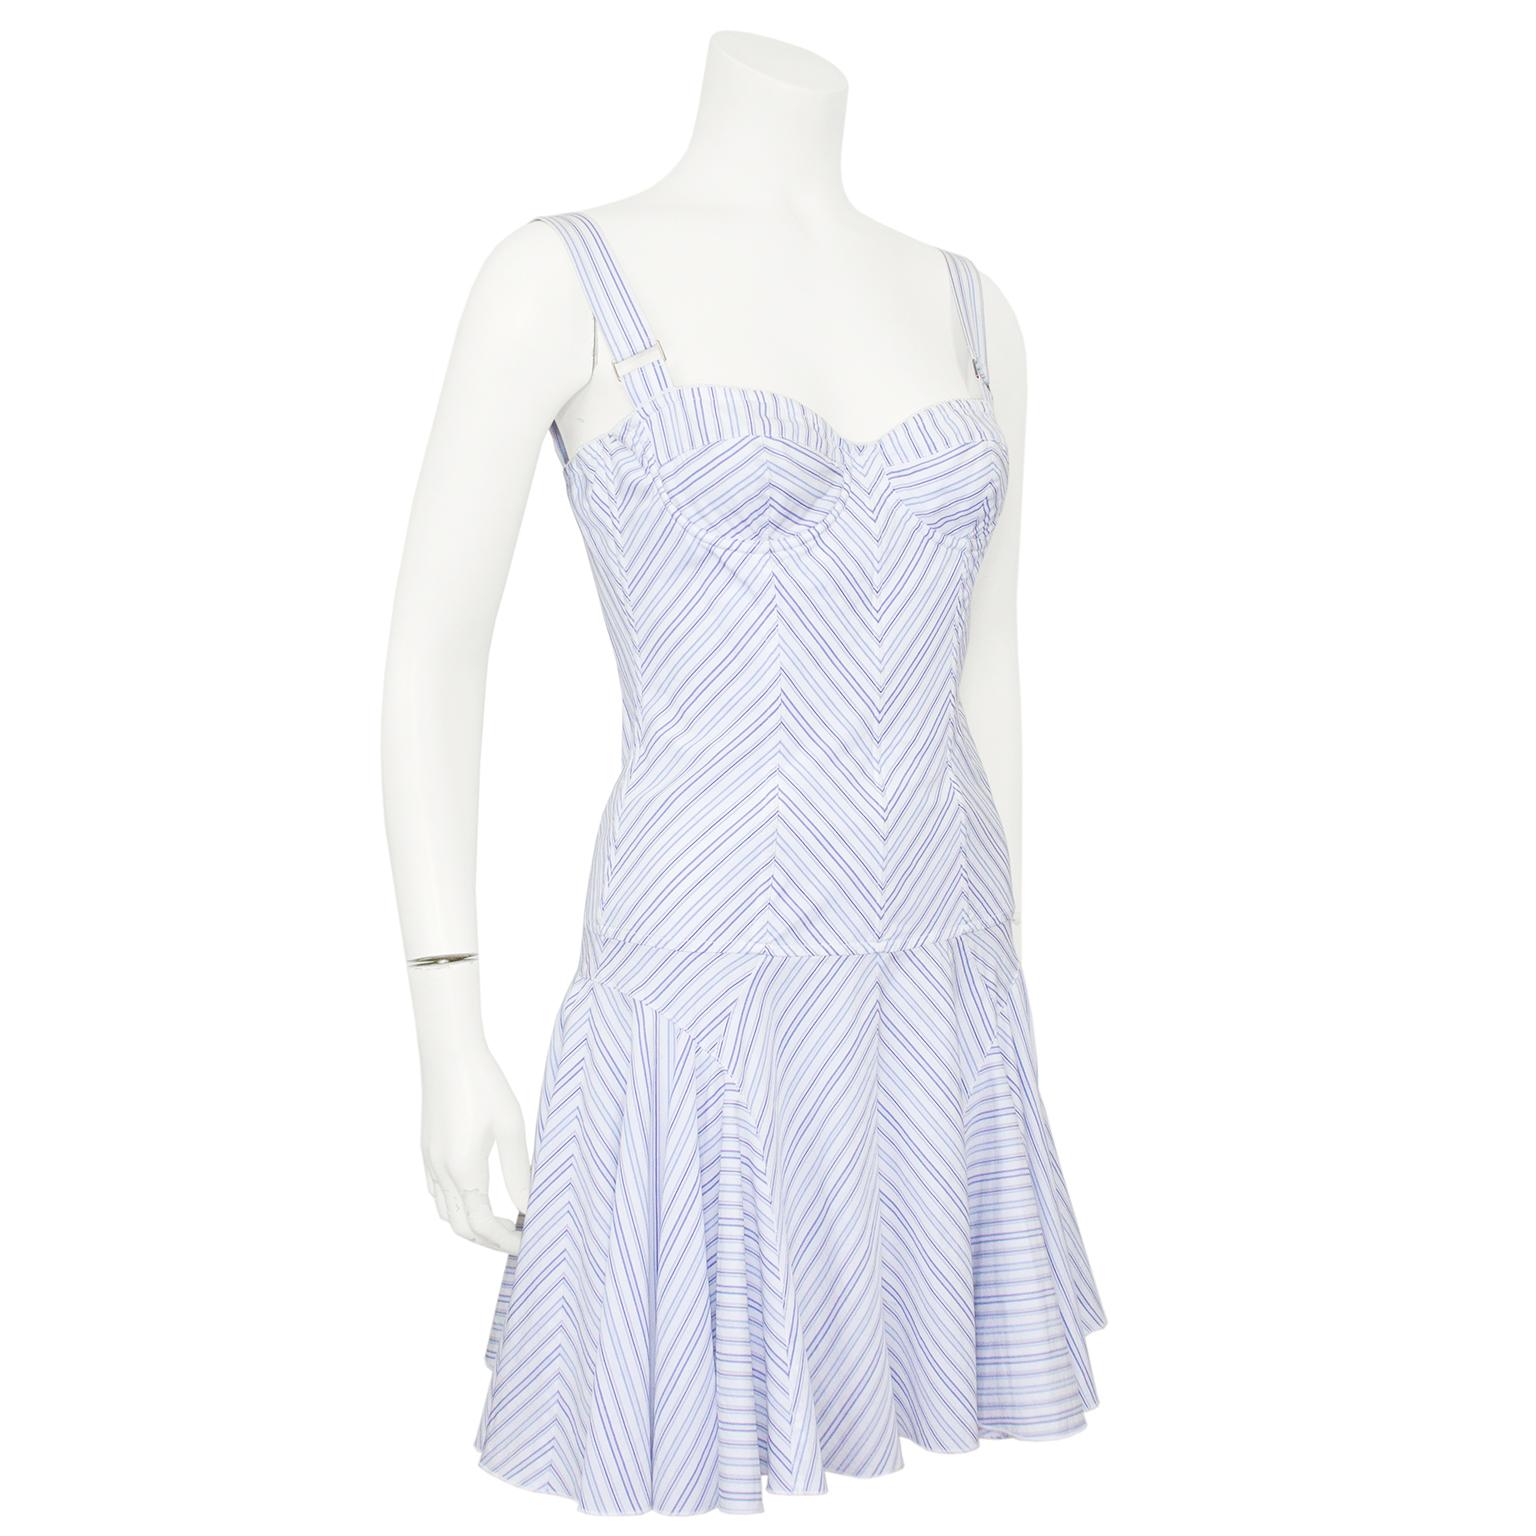 Perfect for summer white and blue chevron striped cotton Dolce and Gabbana dress from the early 2000s. Bustier bodice with wired cups and boning to the hips. Drop waist fit and flare short skirt. 1.5